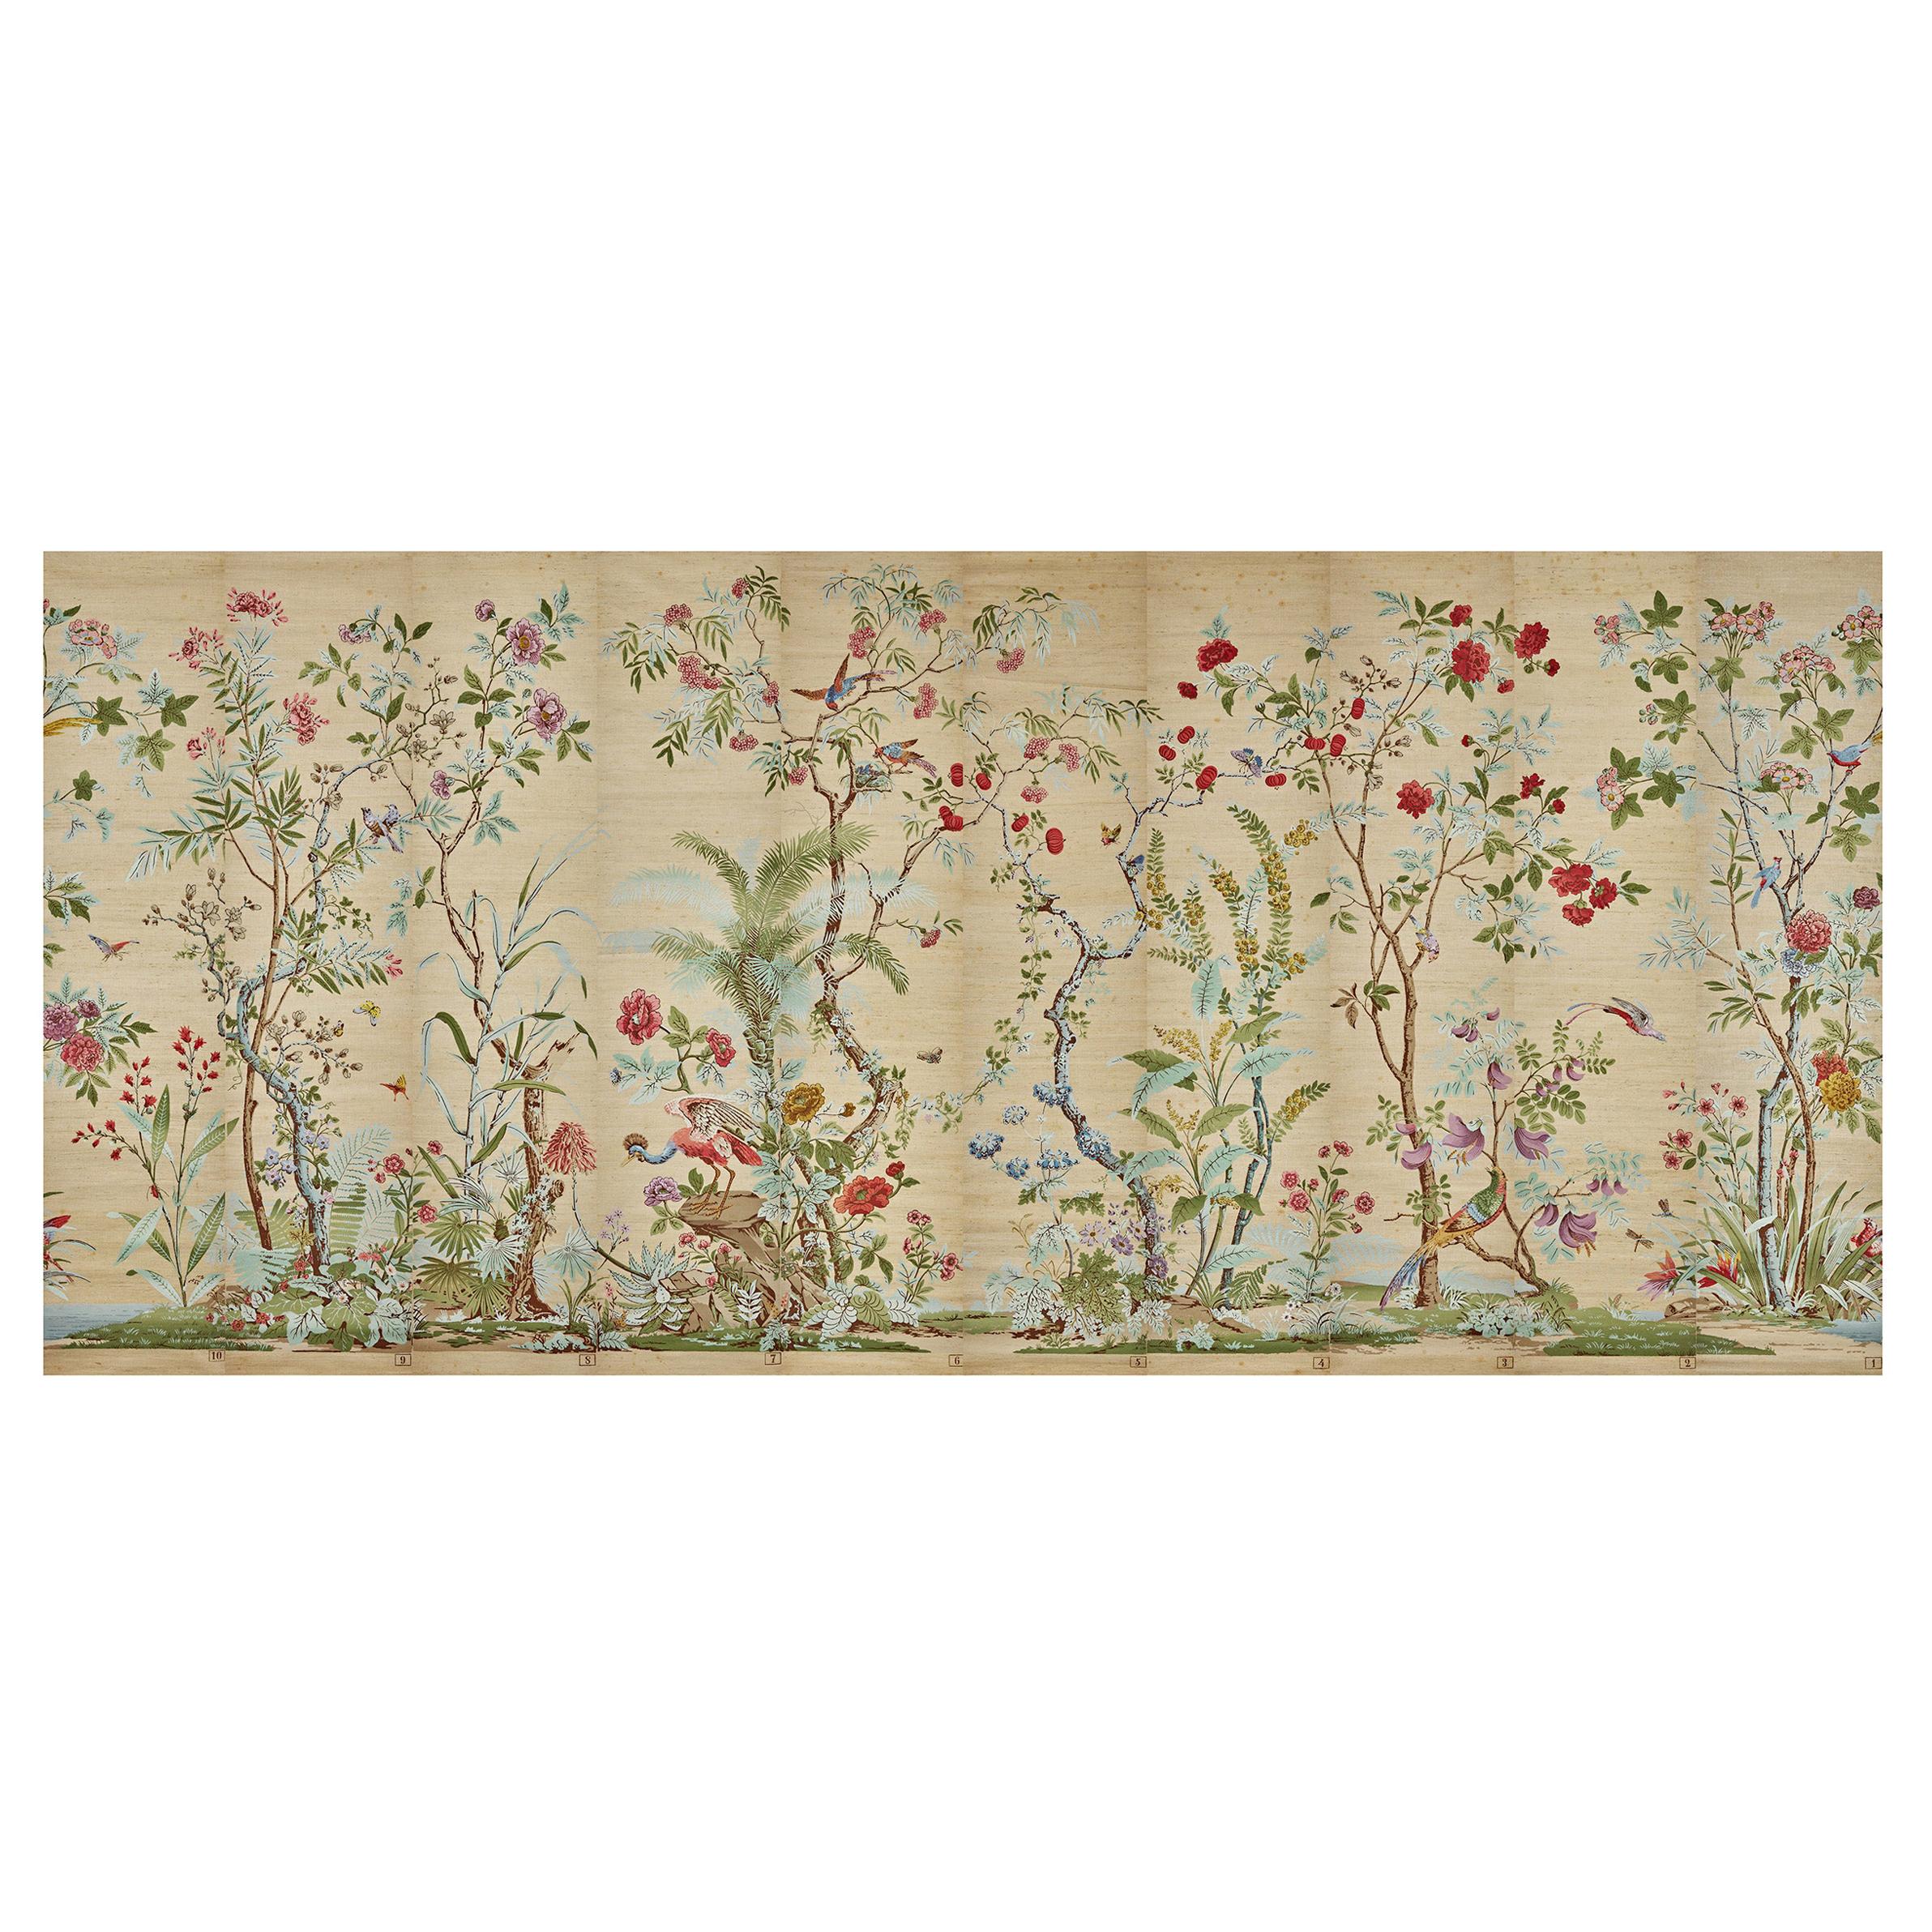 Zuber, 'Decor Chinois' Hand Wood Blocked on Grasscloth Scenic Wallpaper For Sale